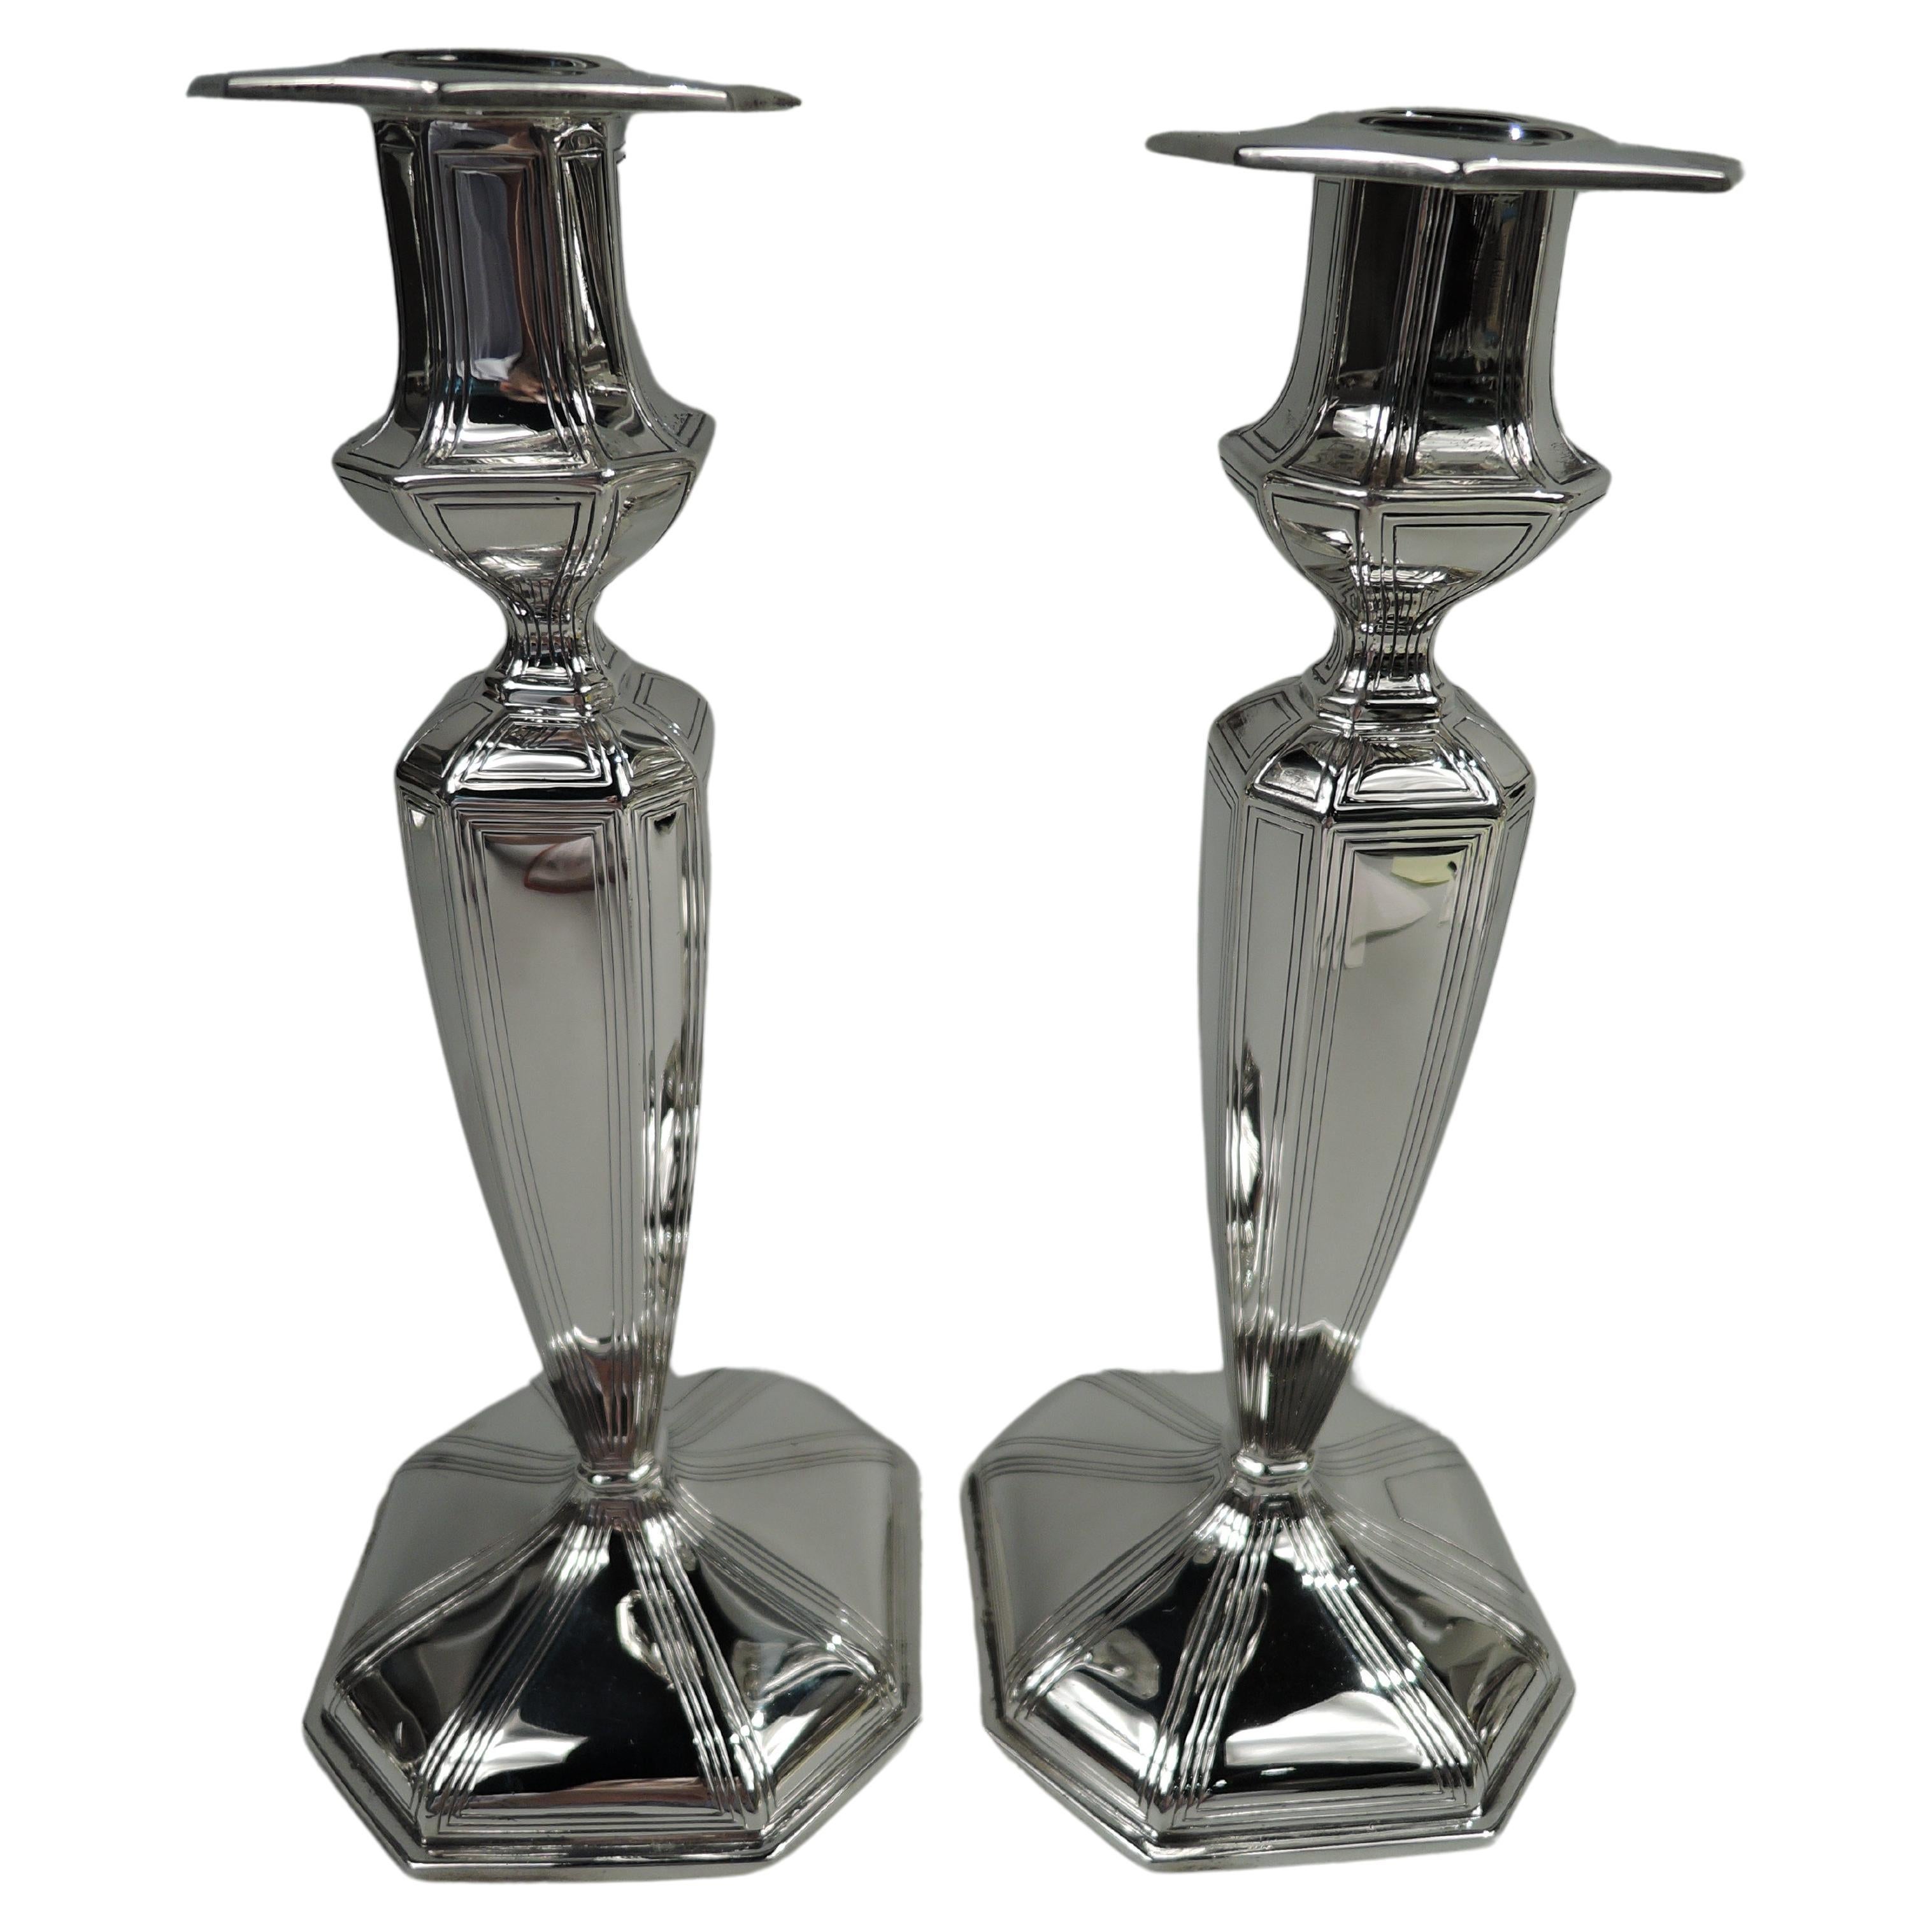 Black, Starr & Frost Candle Holders